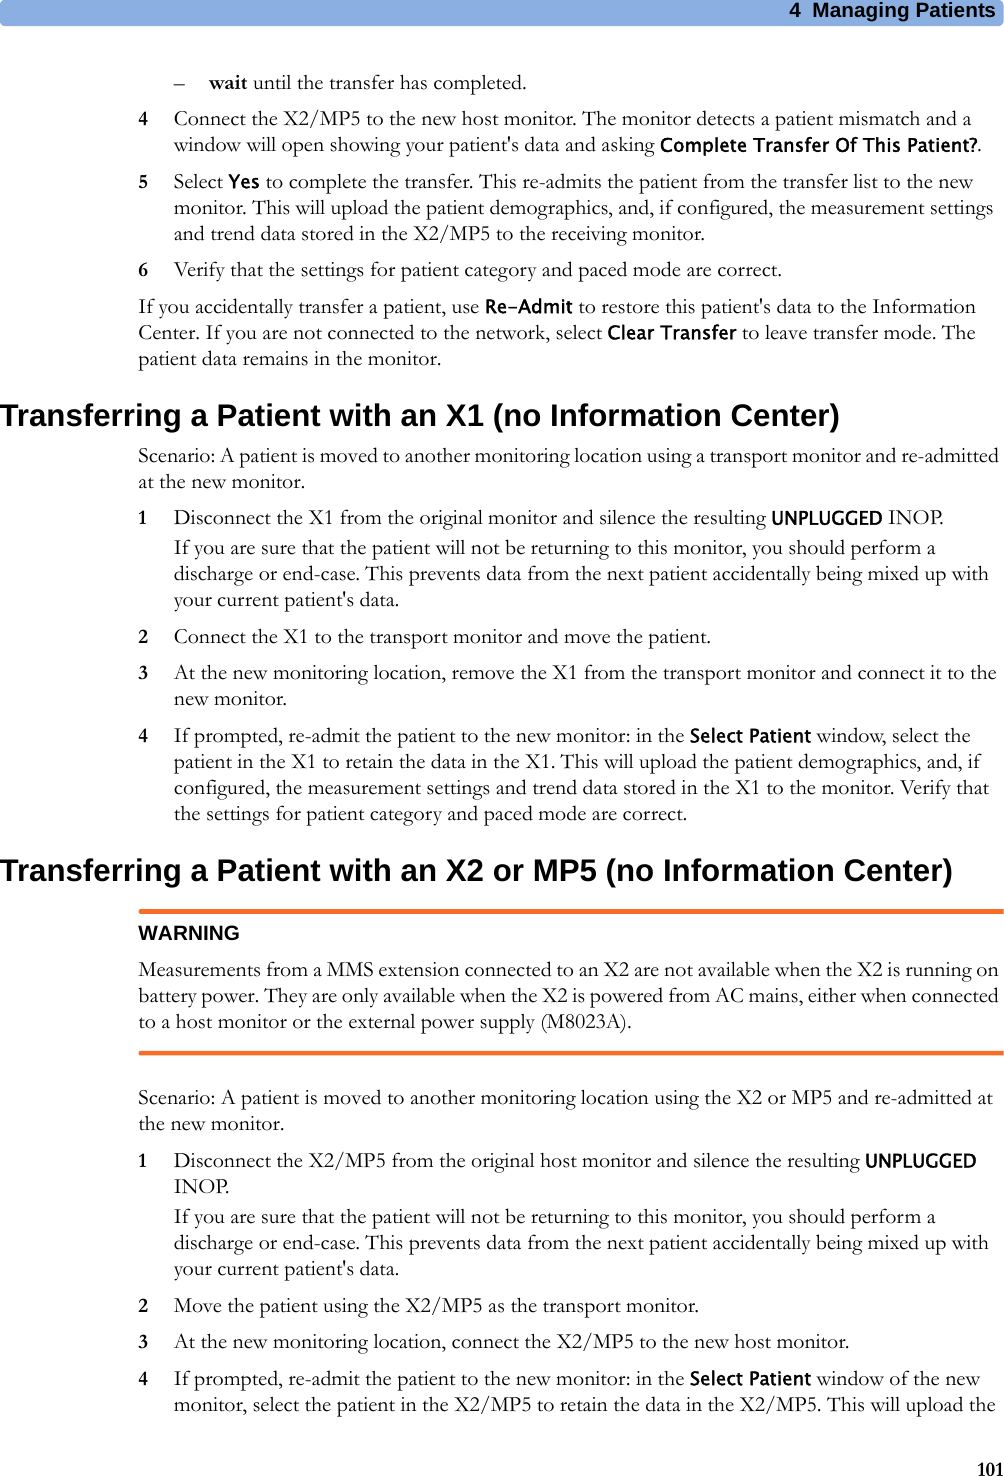 4 Managing Patients101–wait until the transfer has completed.4Connect the X2/MP5 to the new host monitor. The monitor detects a patient mismatch and a window will open showing your patient&apos;s data and asking Complete Transfer Of This Patient?.5Select Yes to complete the transfer. This re-admits the patient from the transfer list to the new monitor. This will upload the patient demographics, and, if configured, the measurement settings and trend data stored in the X2/MP5 to the receiving monitor.6Verify that the settings for patient category and paced mode are correct.If you accidentally transfer a patient, use Re-Admit to restore this patient&apos;s data to the Information Center. If you are not connected to the network, select Clear Transfer to leave transfer mode. The patient data remains in the monitor.Transferring a Patient with an X1 (no Information Center)Scenario: A patient is moved to another monitoring location using a transport monitor and re-admitted at the new monitor.1Disconnect the X1 from the original monitor and silence the resulting UNPLUGGED INOP.If you are sure that the patient will not be returning to this monitor, you should perform a discharge or end-case. This prevents data from the next patient accidentally being mixed up with your current patient&apos;s data.2Connect the X1 to the transport monitor and move the patient.3At the new monitoring location, remove the X1 from the transport monitor and connect it to the new monitor.4If prompted, re-admit the patient to the new monitor: in the Select Patient window, select the patient in the X1 to retain the data in the X1. This will upload the patient demographics, and, if configured, the measurement settings and trend data stored in the X1 to the monitor. Verify that the settings for patient category and paced mode are correct.Transferring a Patient with an X2 or MP5 (no Information Center)WARNINGMeasurements from a MMS extension connected to an X2 are not available when the X2 is running on battery power. They are only available when the X2 is powered from AC mains, either when connected to a host monitor or the external power supply (M8023A).Scenario: A patient is moved to another monitoring location using the X2 or MP5 and re-admitted at the new monitor.1Disconnect the X2/MP5 from the original host monitor and silence the resulting UNPLUGGED INOP.If you are sure that the patient will not be returning to this monitor, you should perform a discharge or end-case. This prevents data from the next patient accidentally being mixed up with your current patient&apos;s data.2Move the patient using the X2/MP5 as the transport monitor.3At the new monitoring location, connect the X2/MP5 to the new host monitor.4If prompted, re-admit the patient to the new monitor: in the Select Patient window of the new monitor, select the patient in the X2/MP5 to retain the data in the X2/MP5. This will upload the 